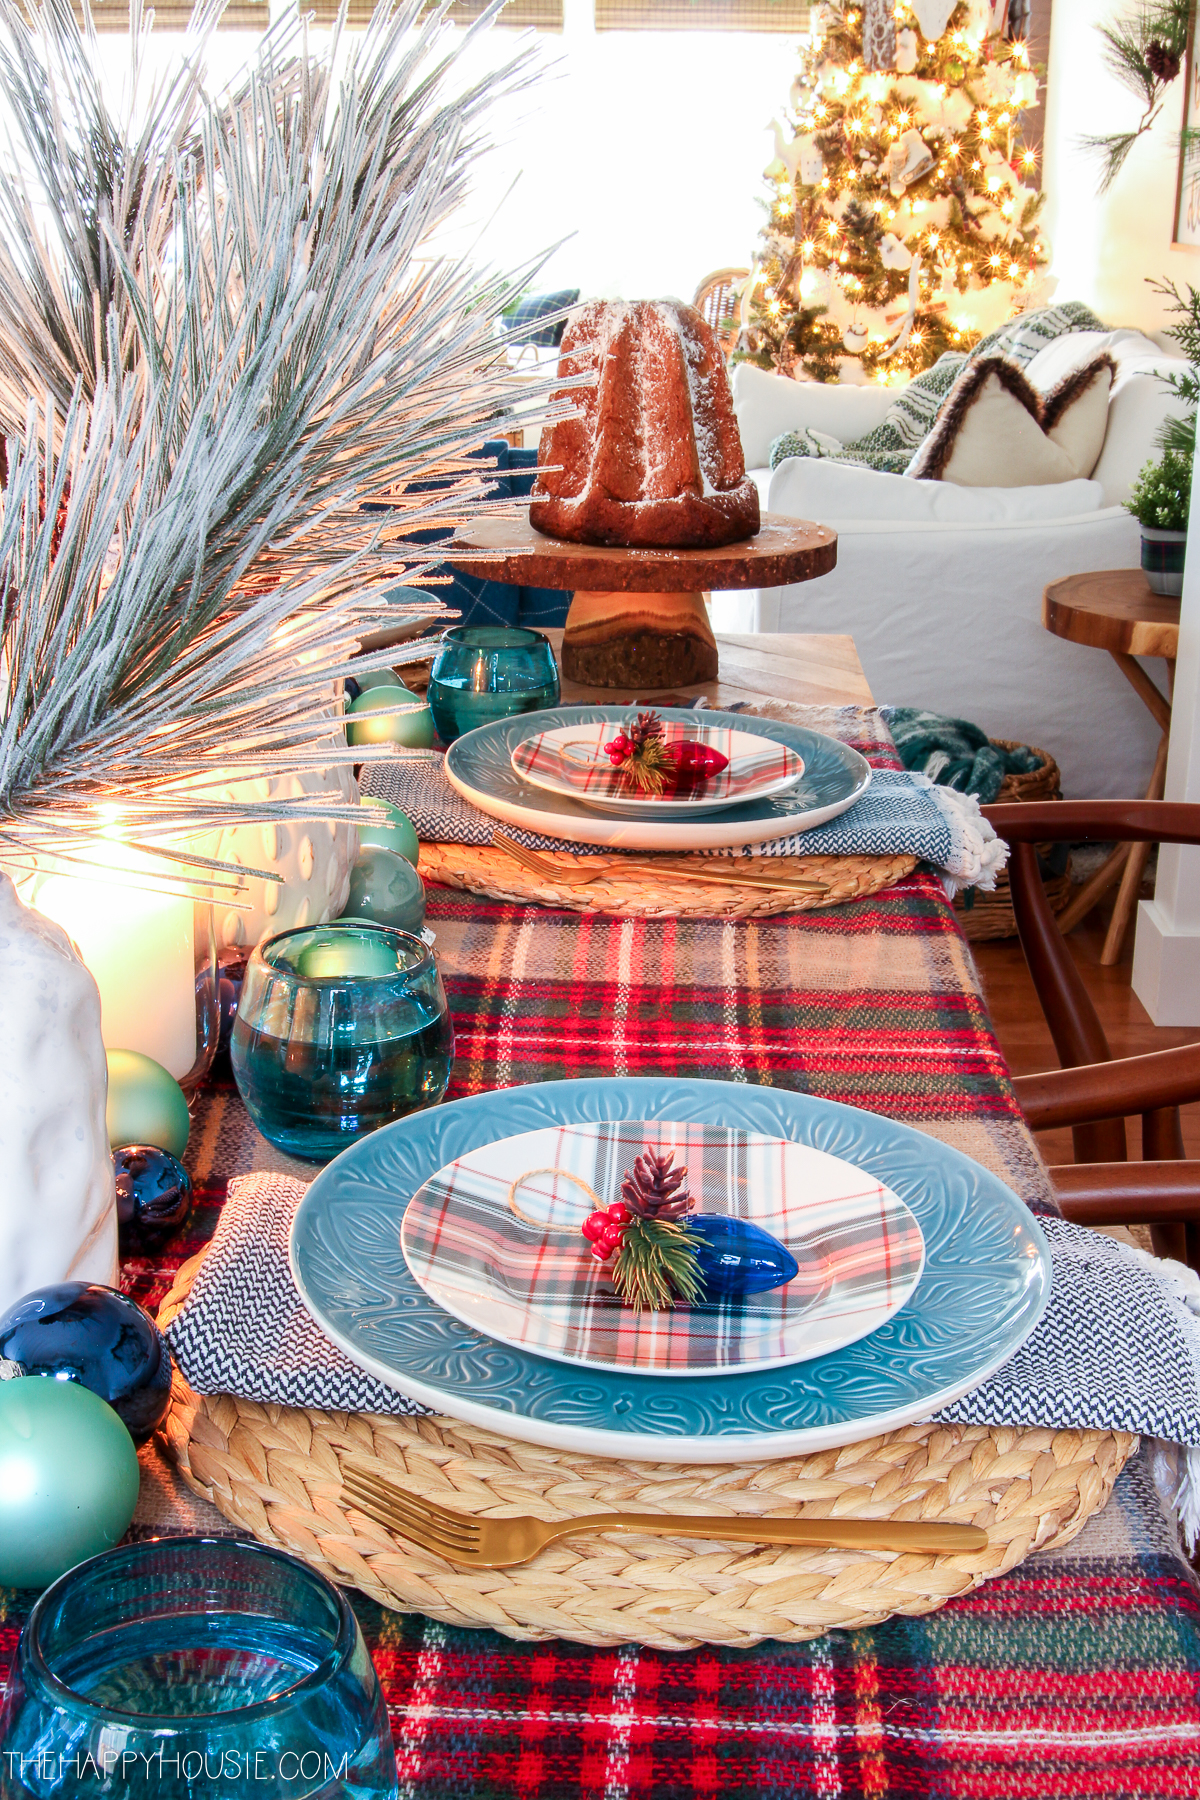 Holiday plaid plates are on larger blue plates.